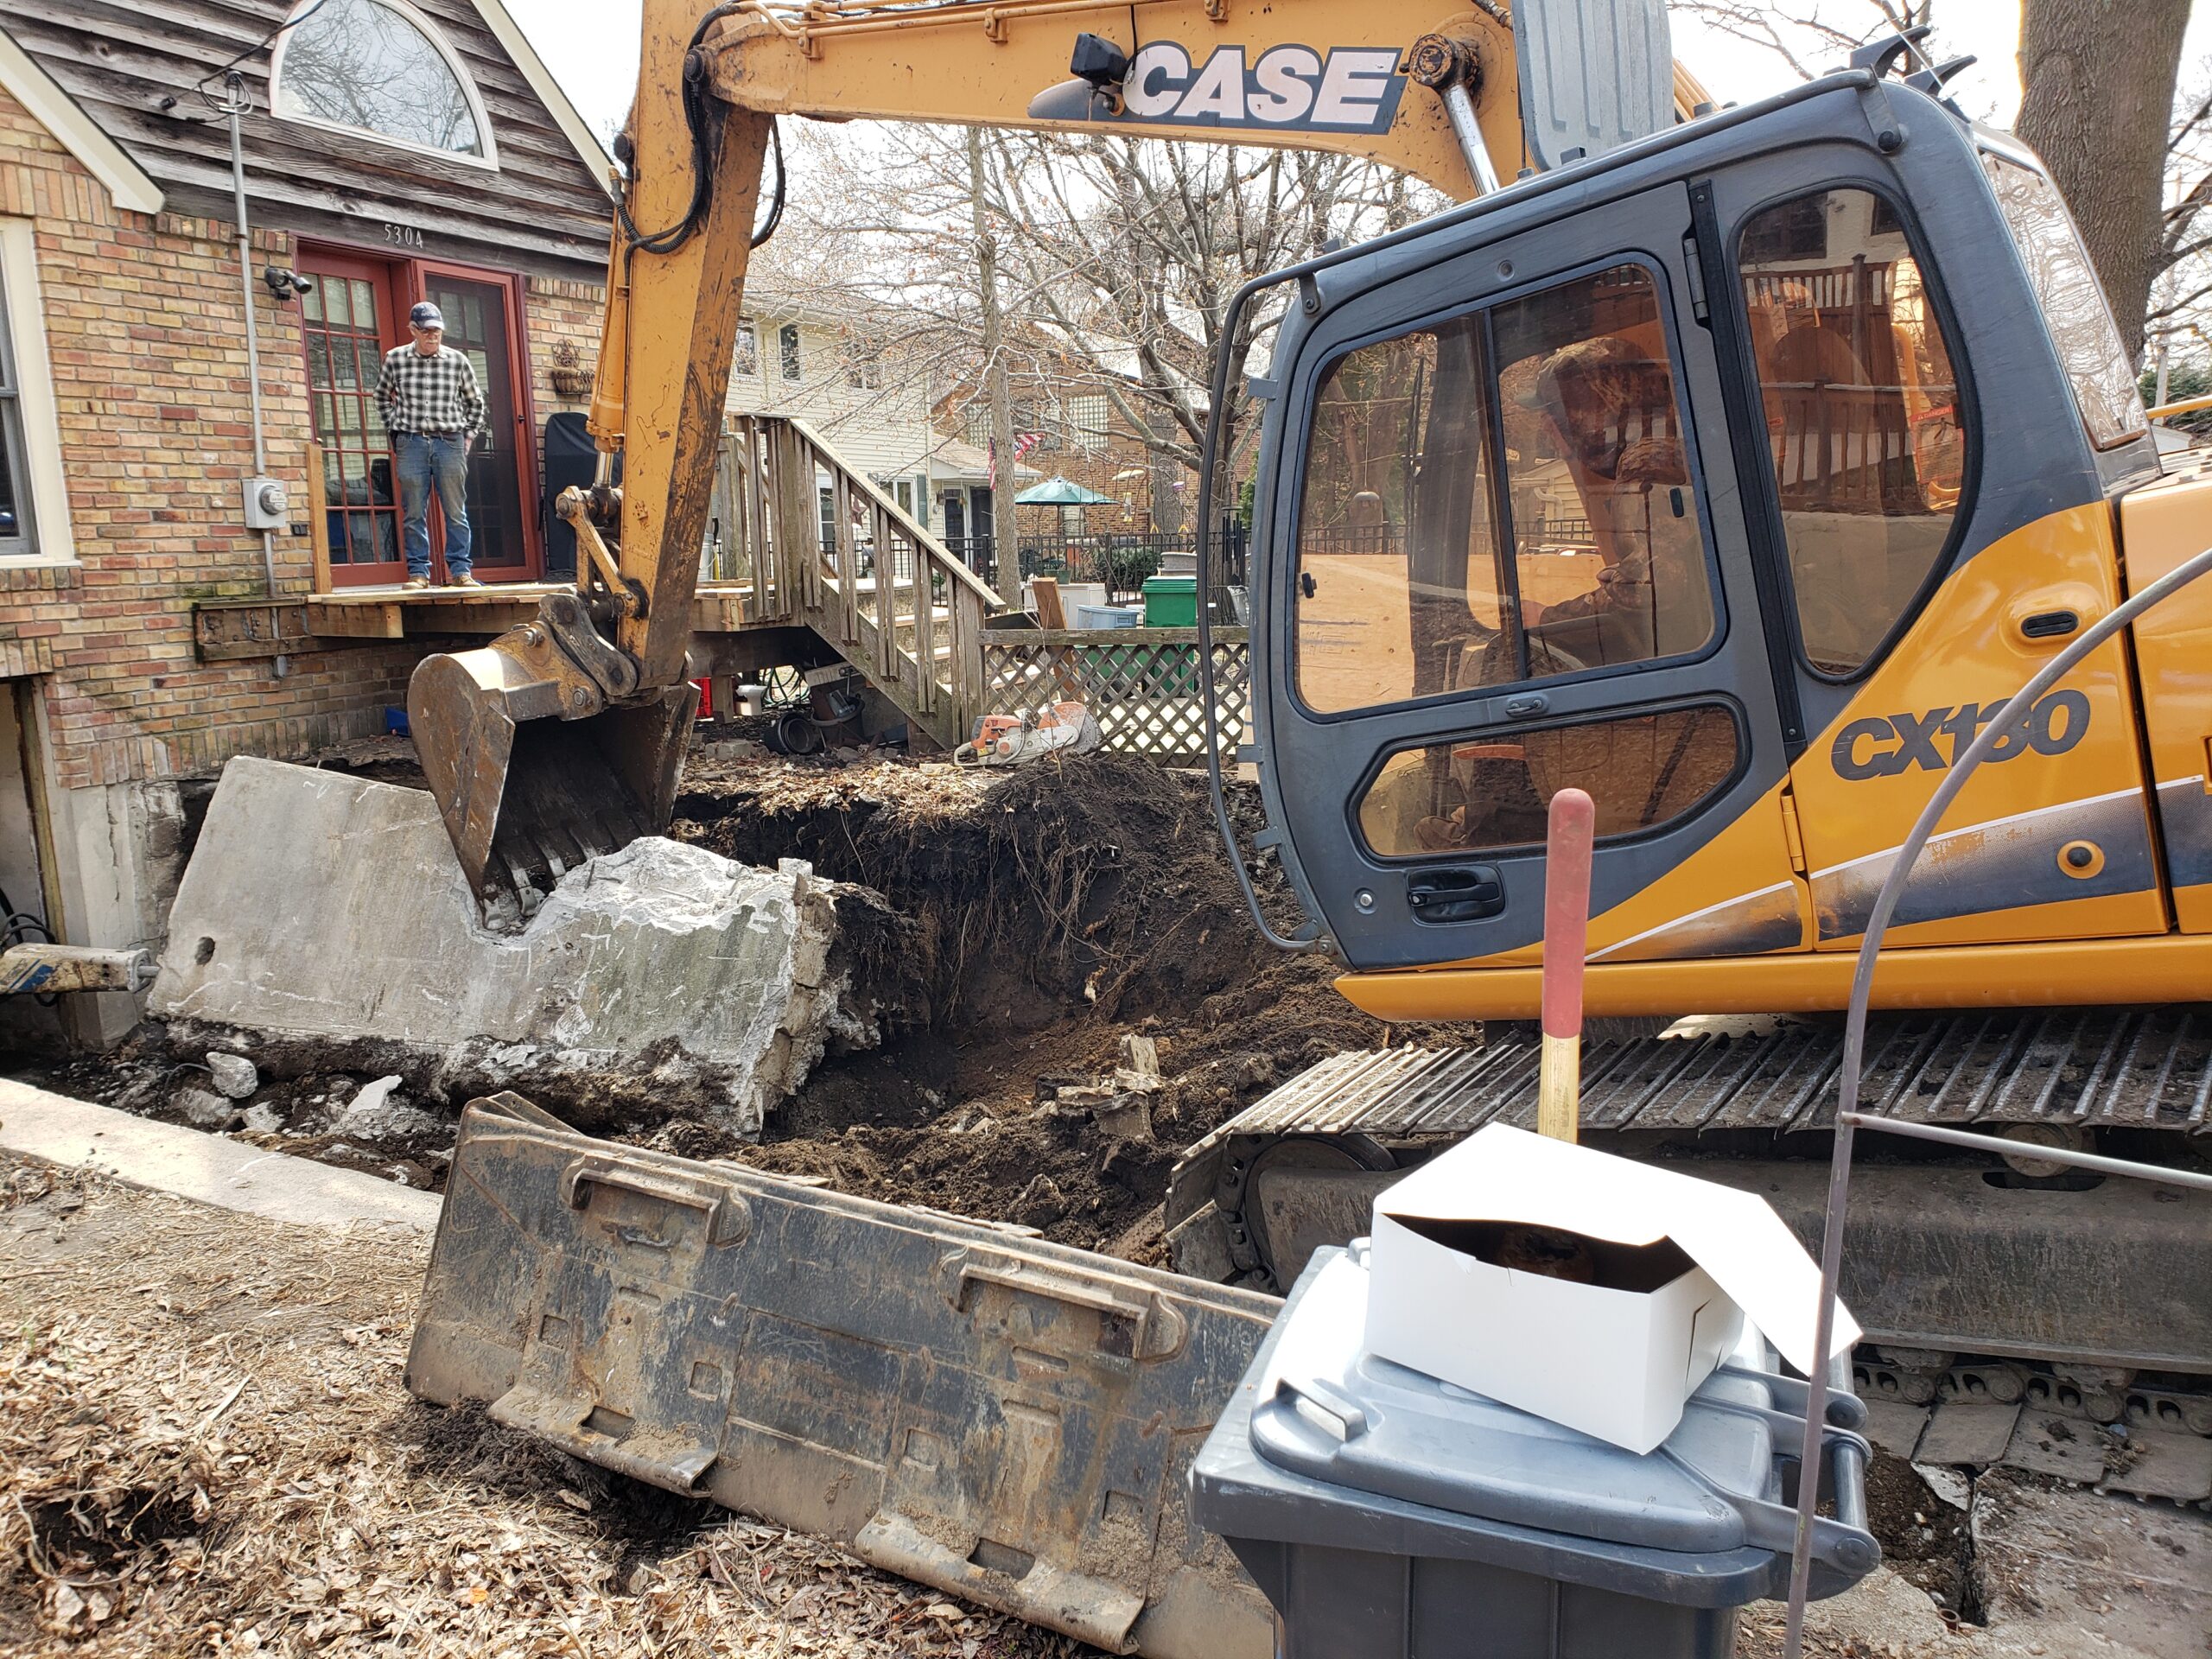 General Demolition, clearing and excavation services for homes and businesses in the Twin Cities metro area from Voehl Construction Inc.